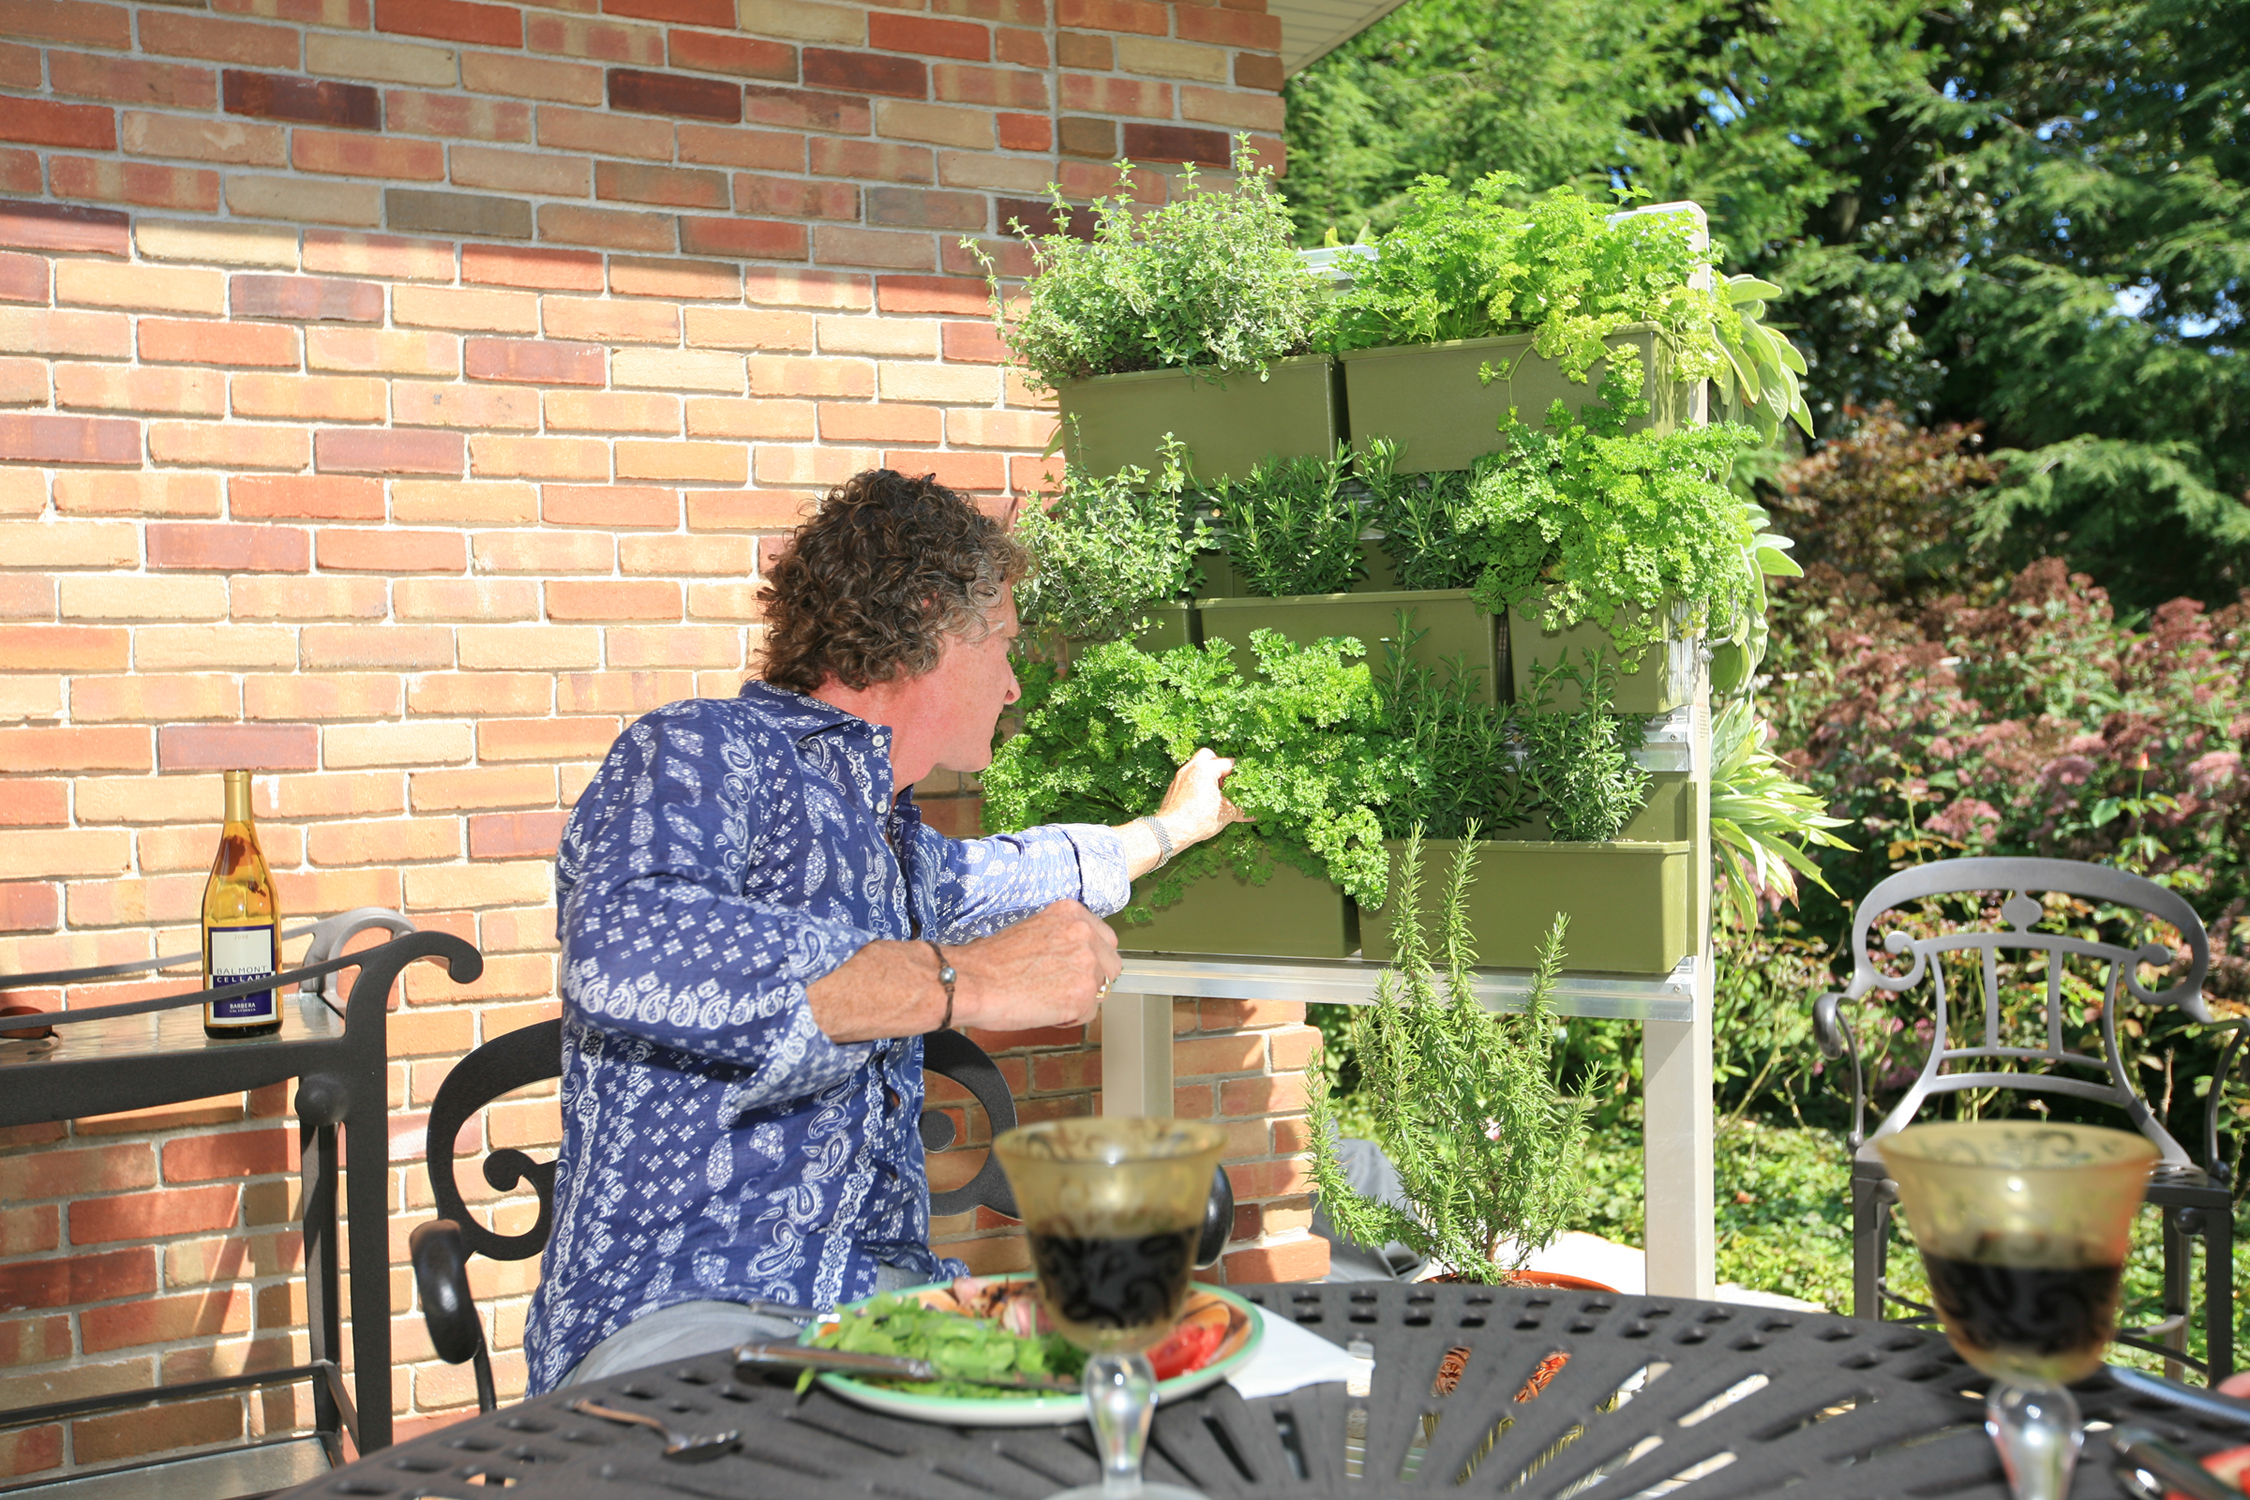 LiveWall vertical gardens in outdoor kitchens provide fresh herbs and vegetables within arm's length.